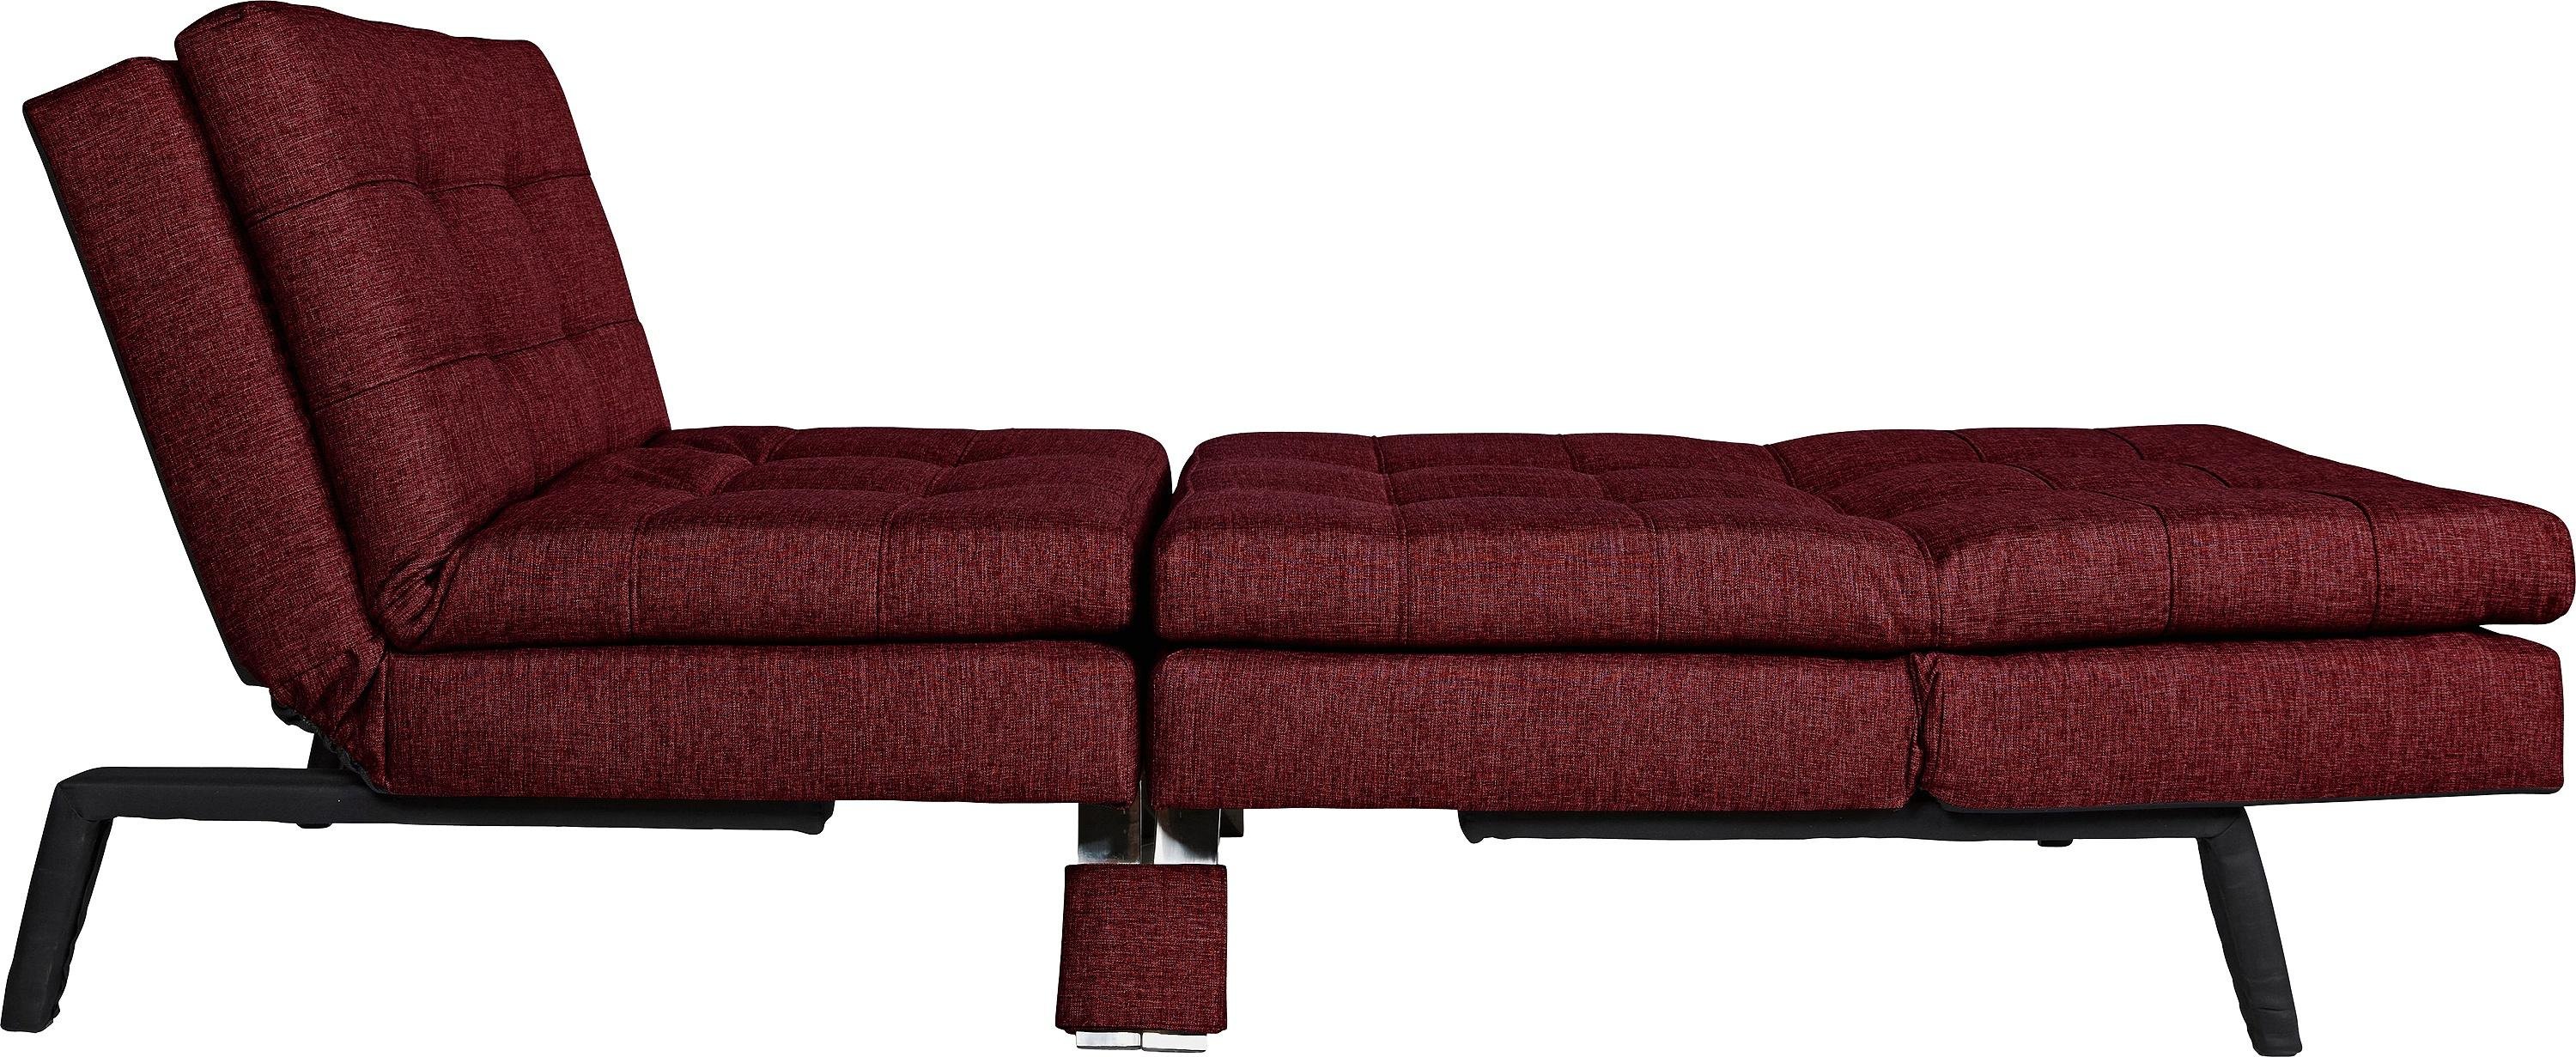 duo fabric clic clac sofa bed review